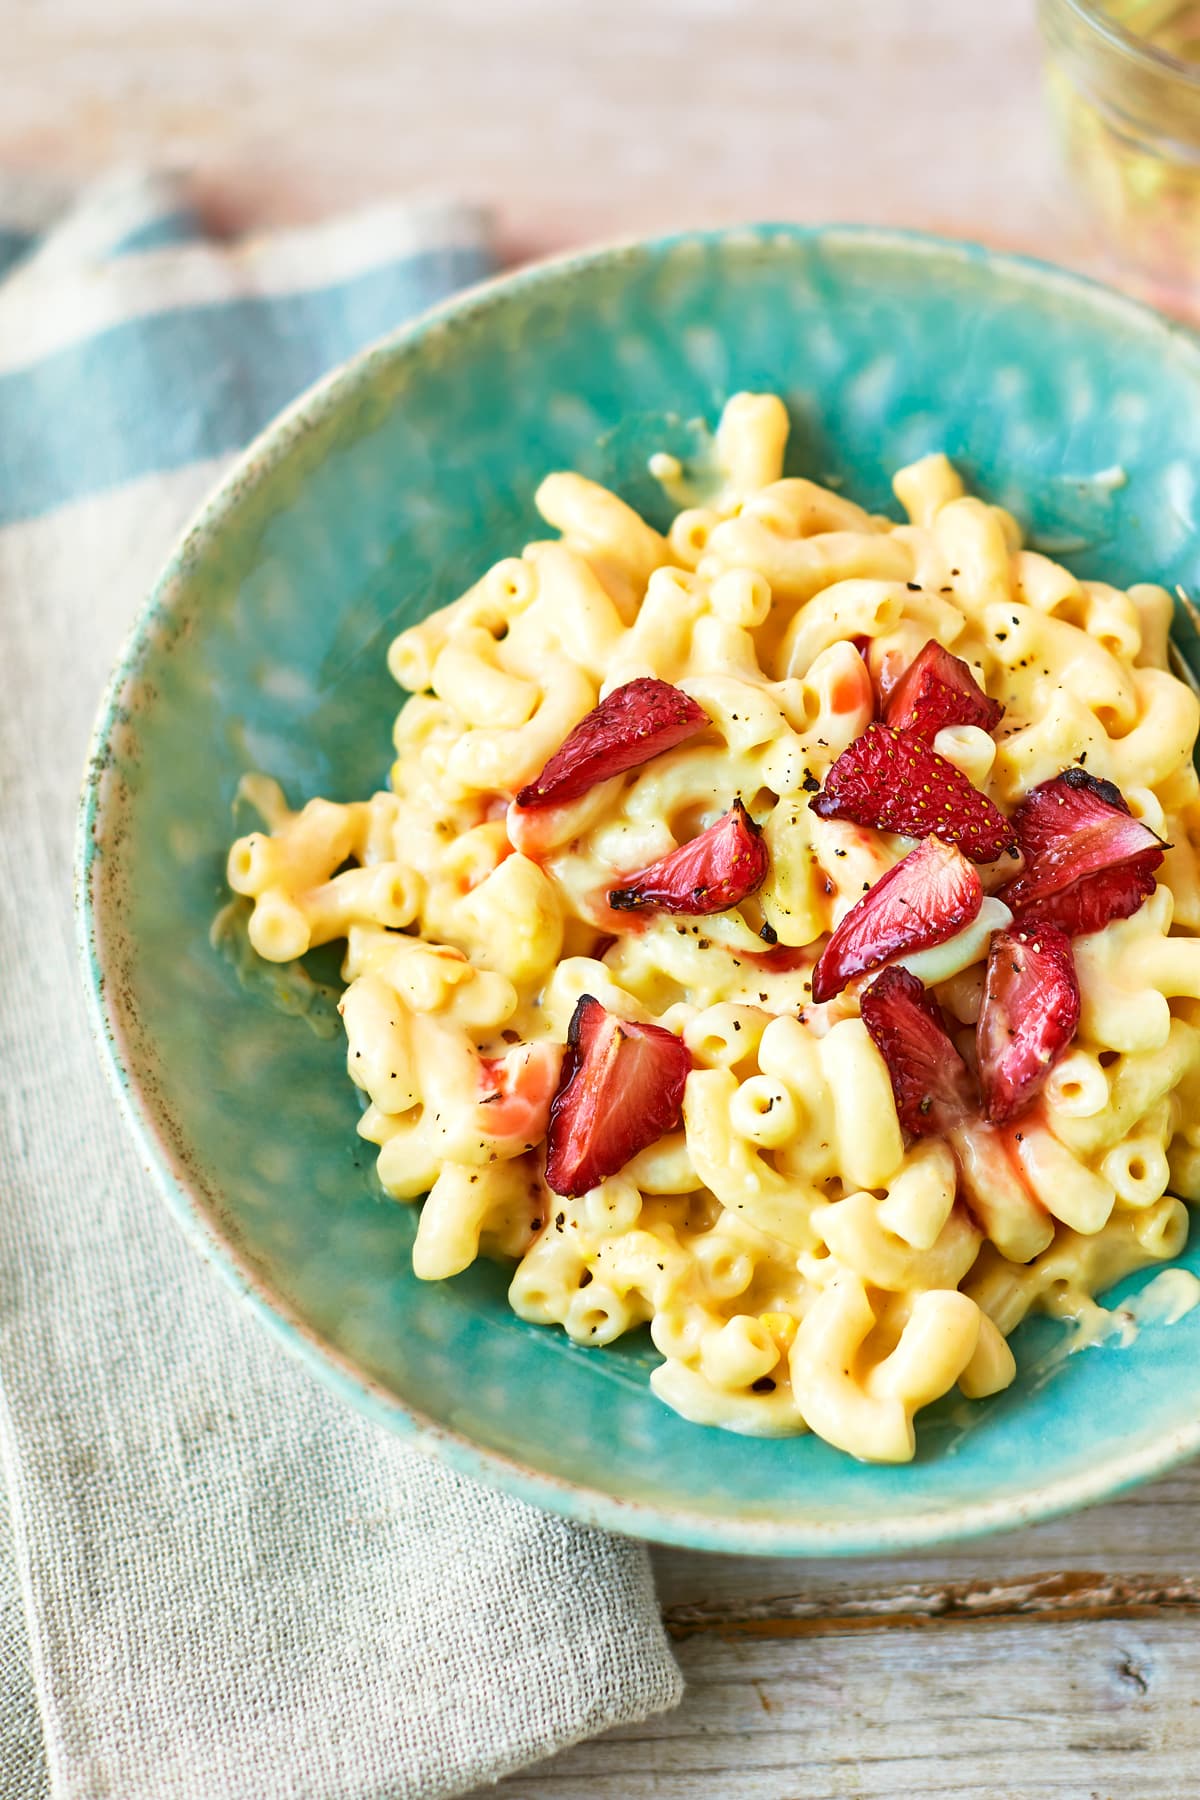 A turquoise bowl of strawberry pasta: macaroni in a cheese and butternut squash sauce, topped with roasted balsamic strawberries. The bowl rests on a tea towel on a wooden background.